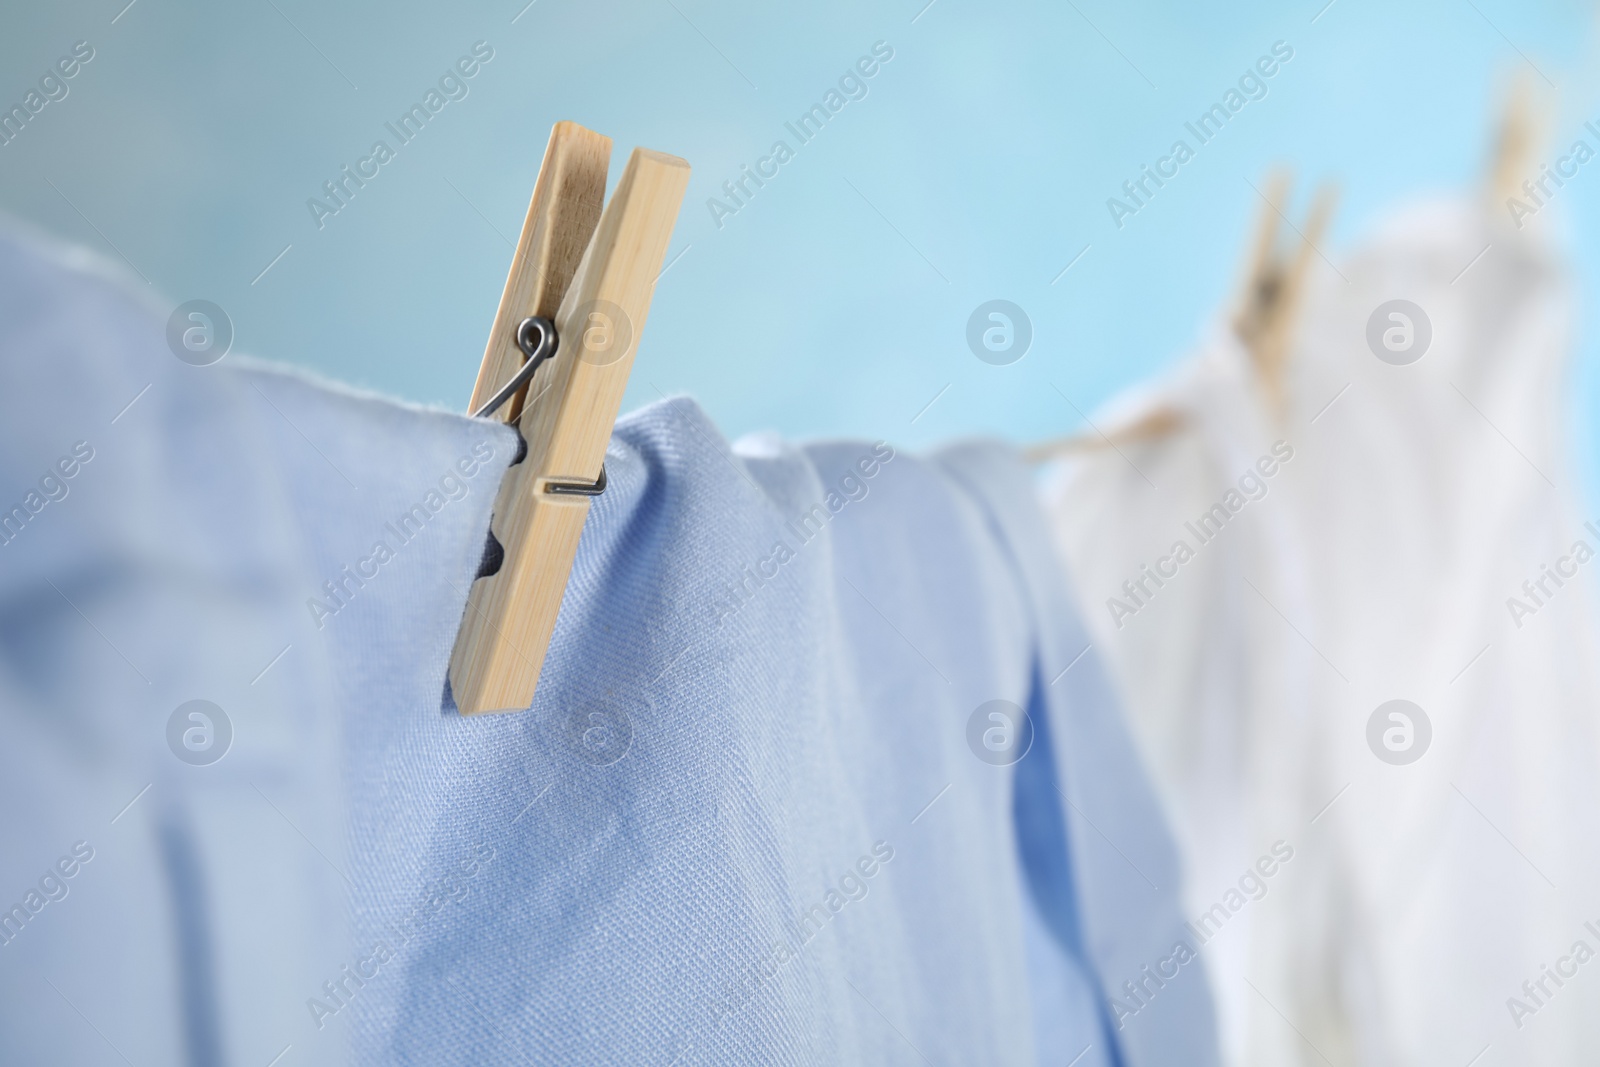 Photo of Washing line with wooden clothespin and garment against blurred background, closeup